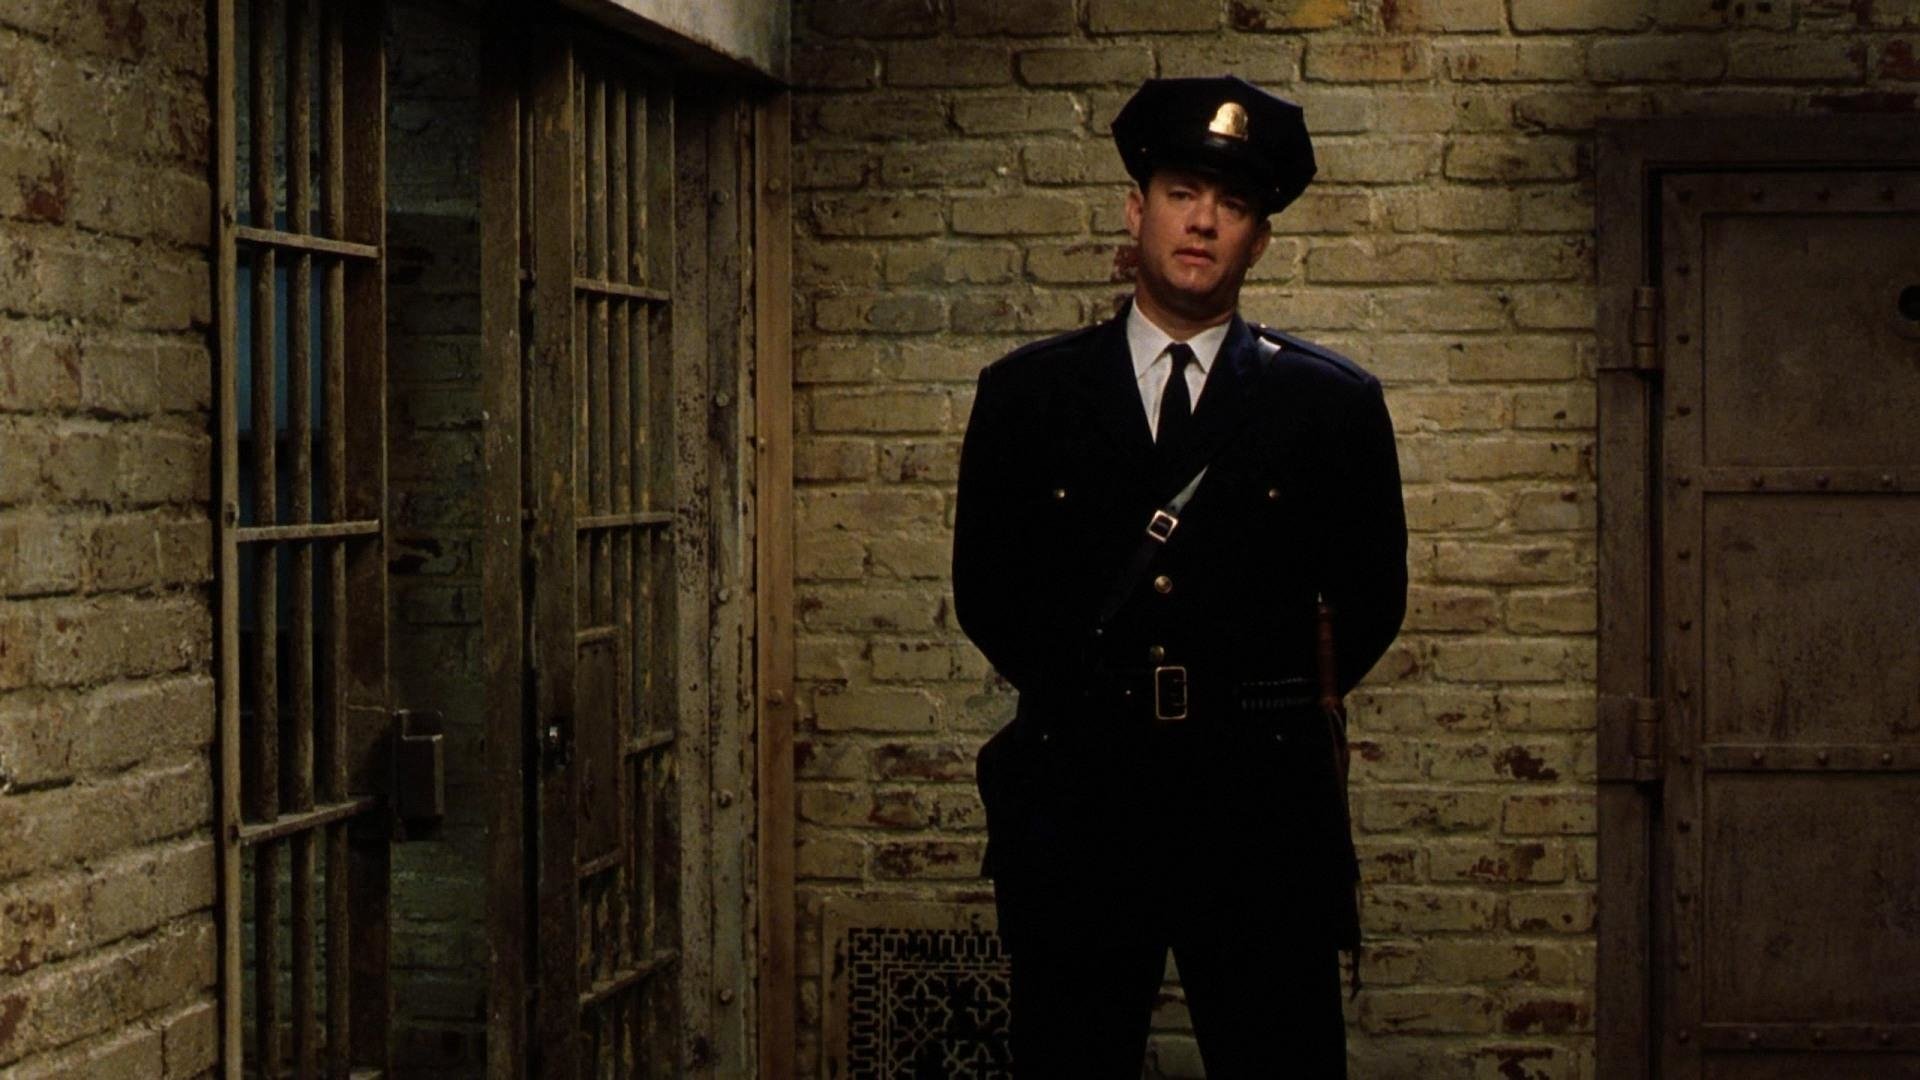 The Green Mile HD Wallpaper Background Image